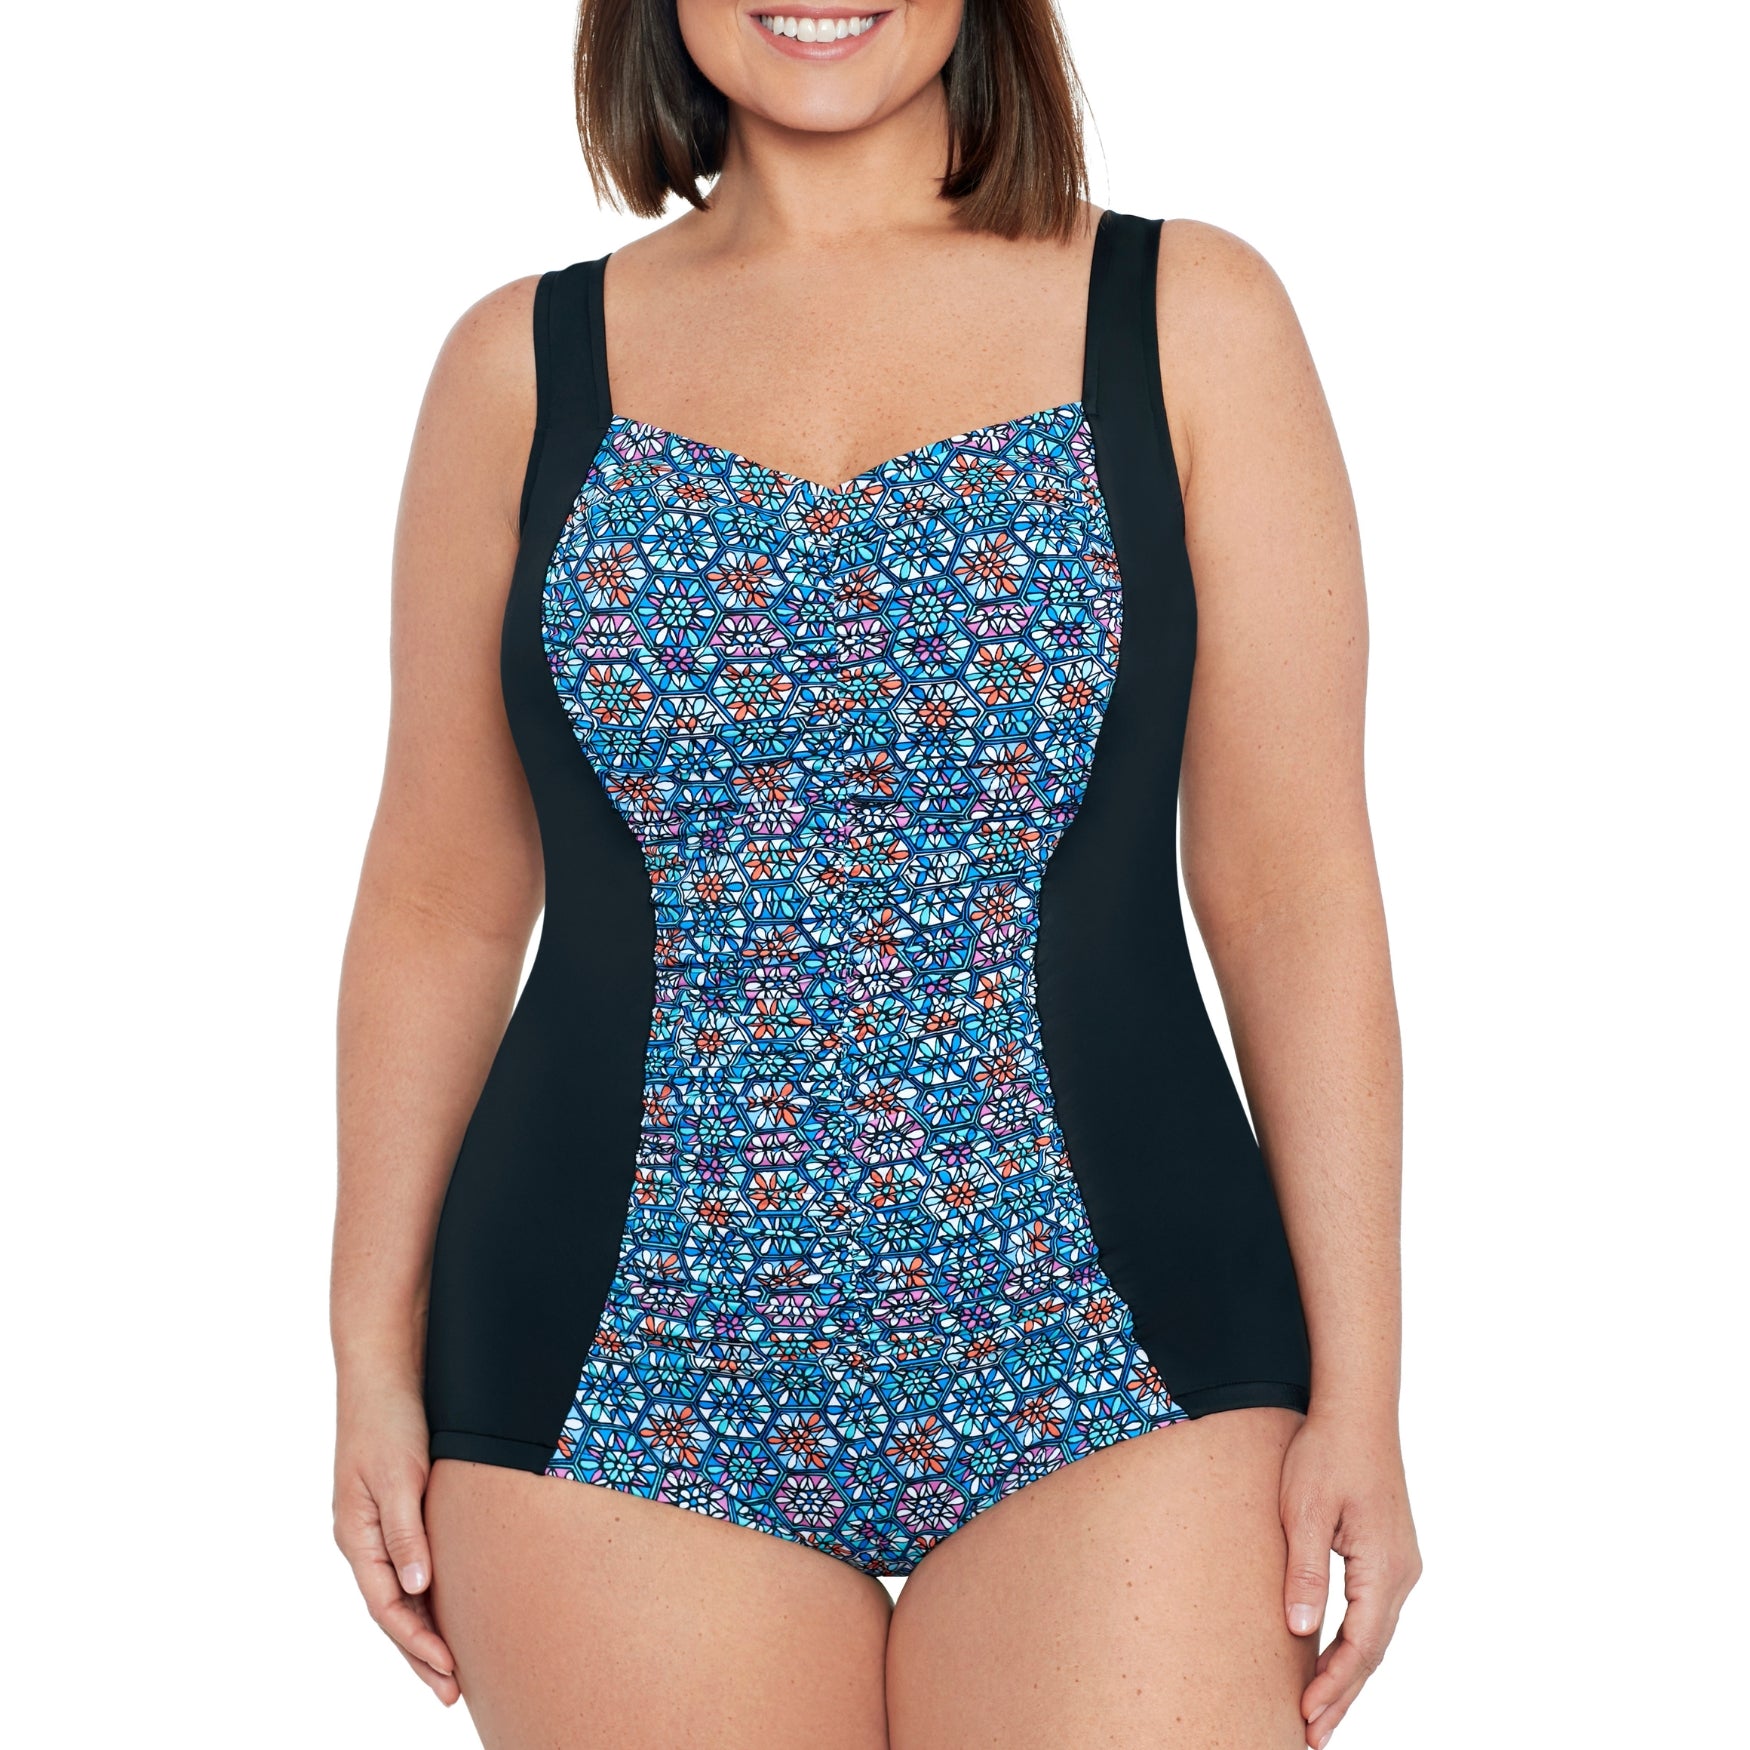 Women's Plus Size Swimsuits With Underwire at SwimsuitsJustForUs